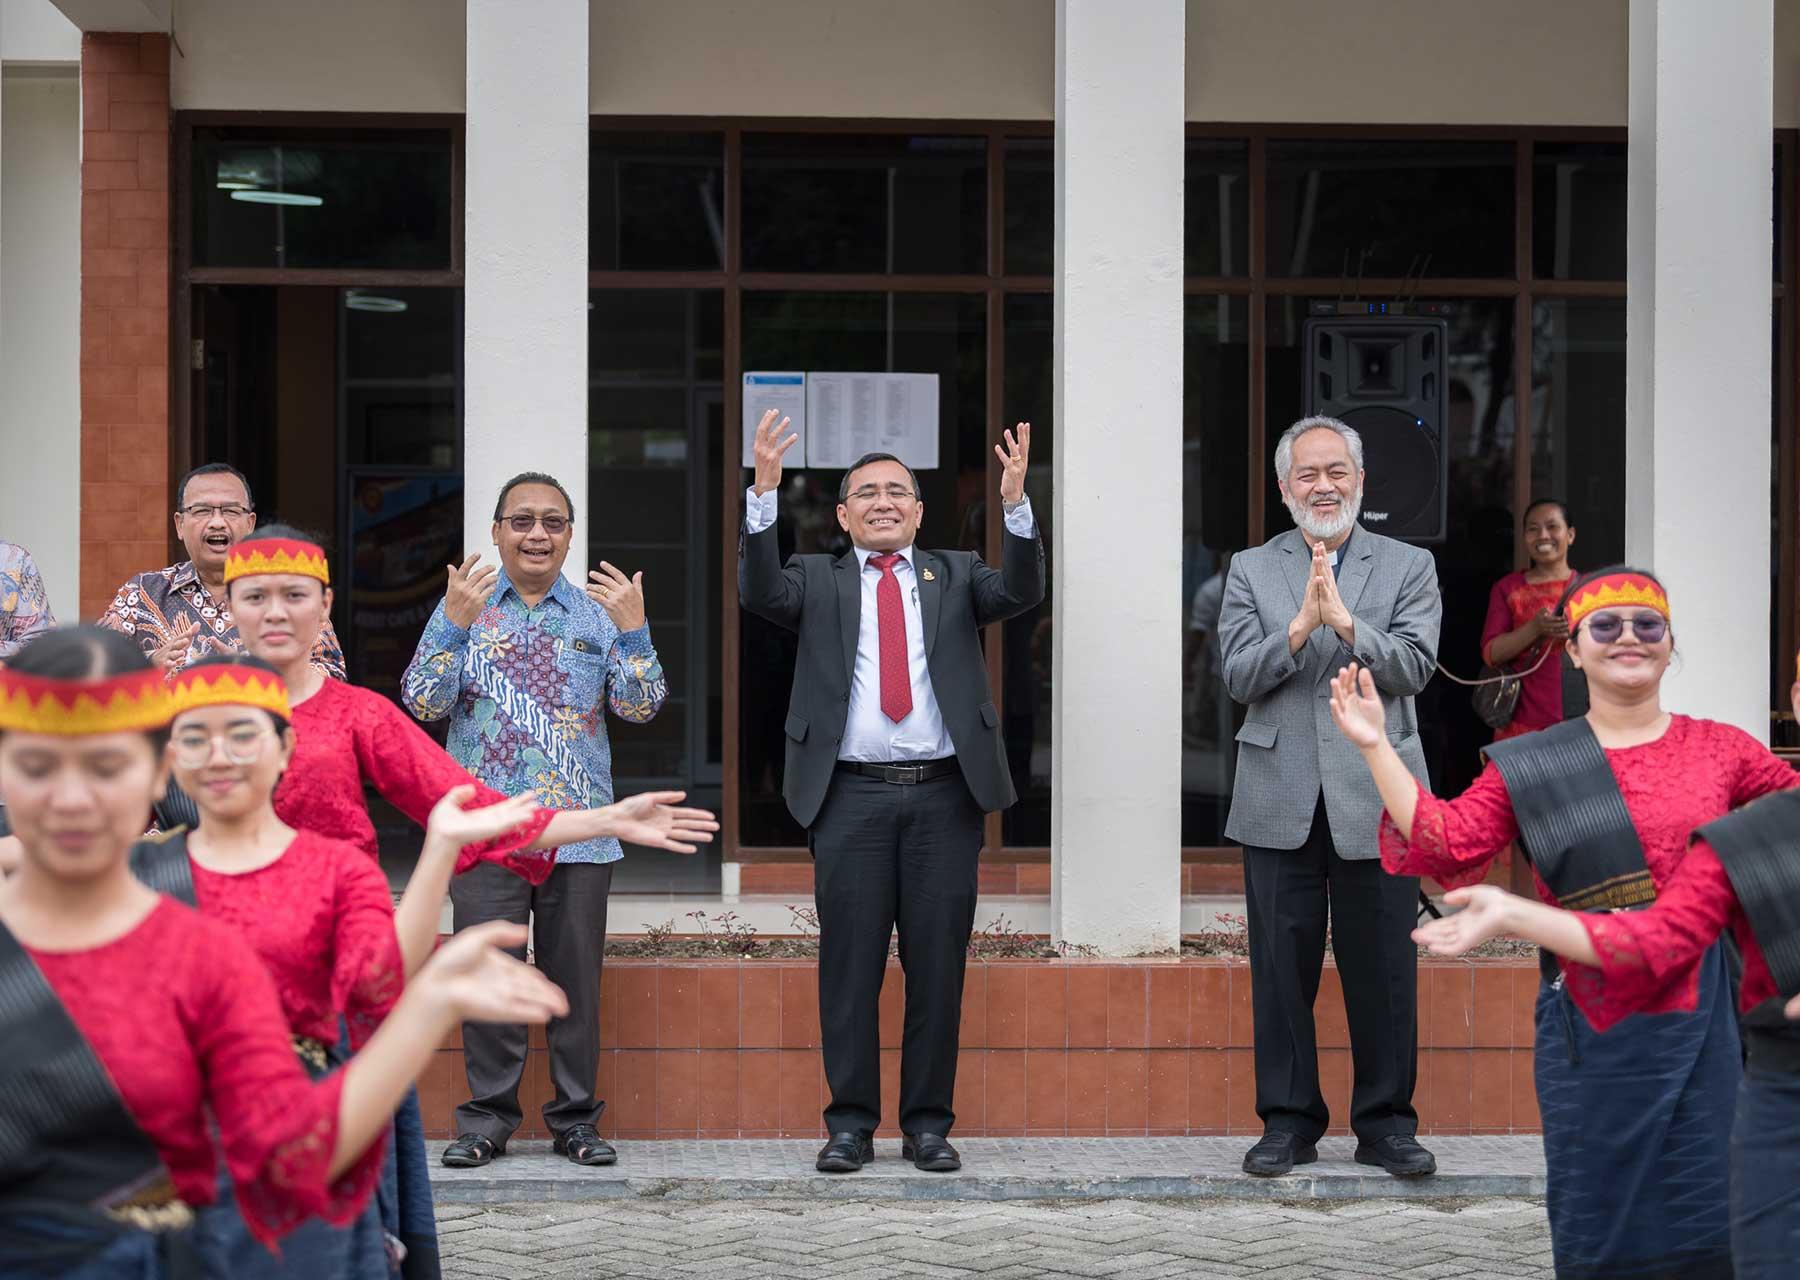 Representatives of LWF member churches in Indonesia offer their welcome to general secretary Rev. Dr Anne Burghardt as she arrives at the Protestant Christian Batak Church (HKBP) in Tarutung. Photo: LWF/Albin Hillert